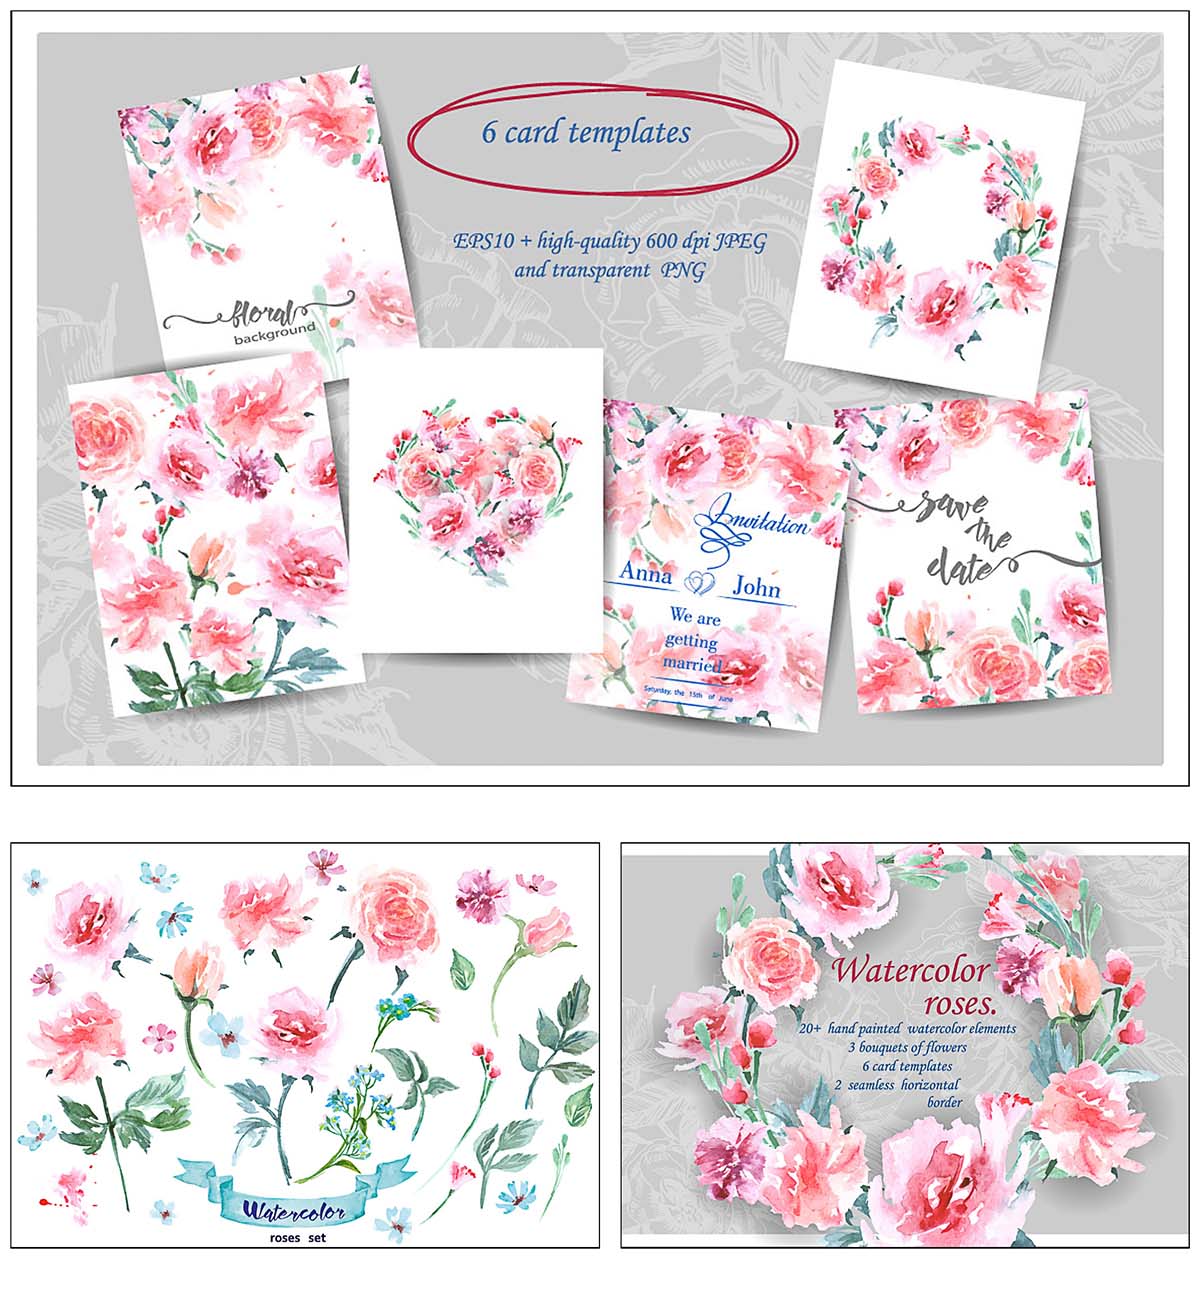 Watercolor roses floral cards set vector